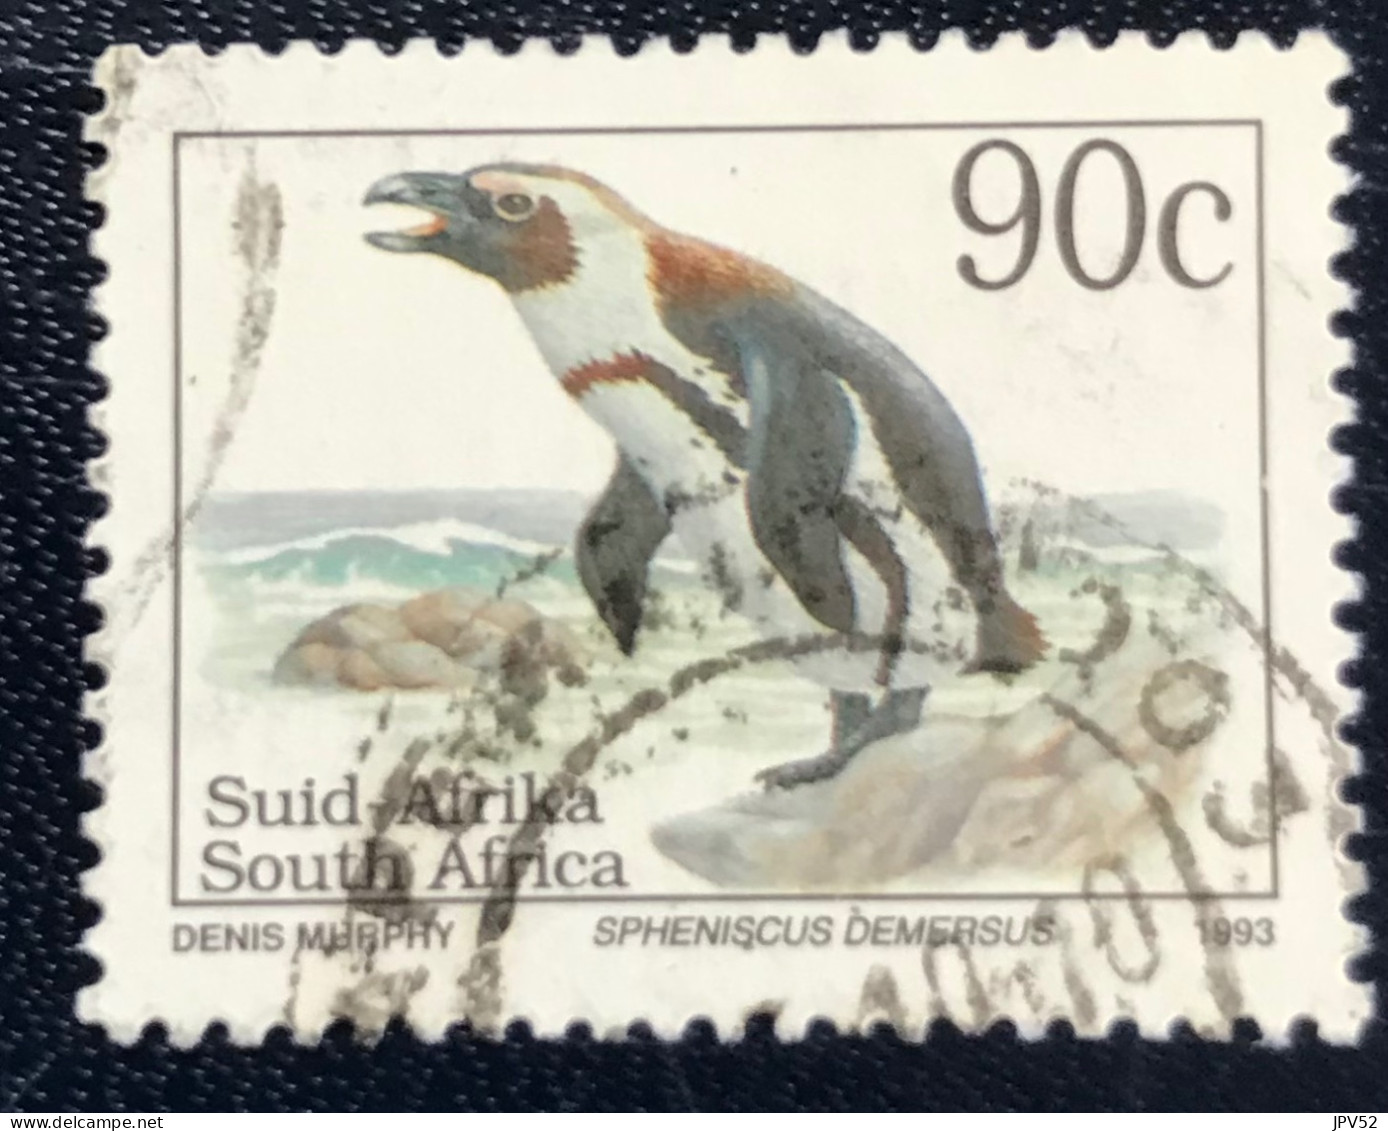 RSA - South Africa - Suid-Afrika  - C18/6 - 1993 - (°)used - Michel 903 IA - Bedreigde Dieren - Used Stamps